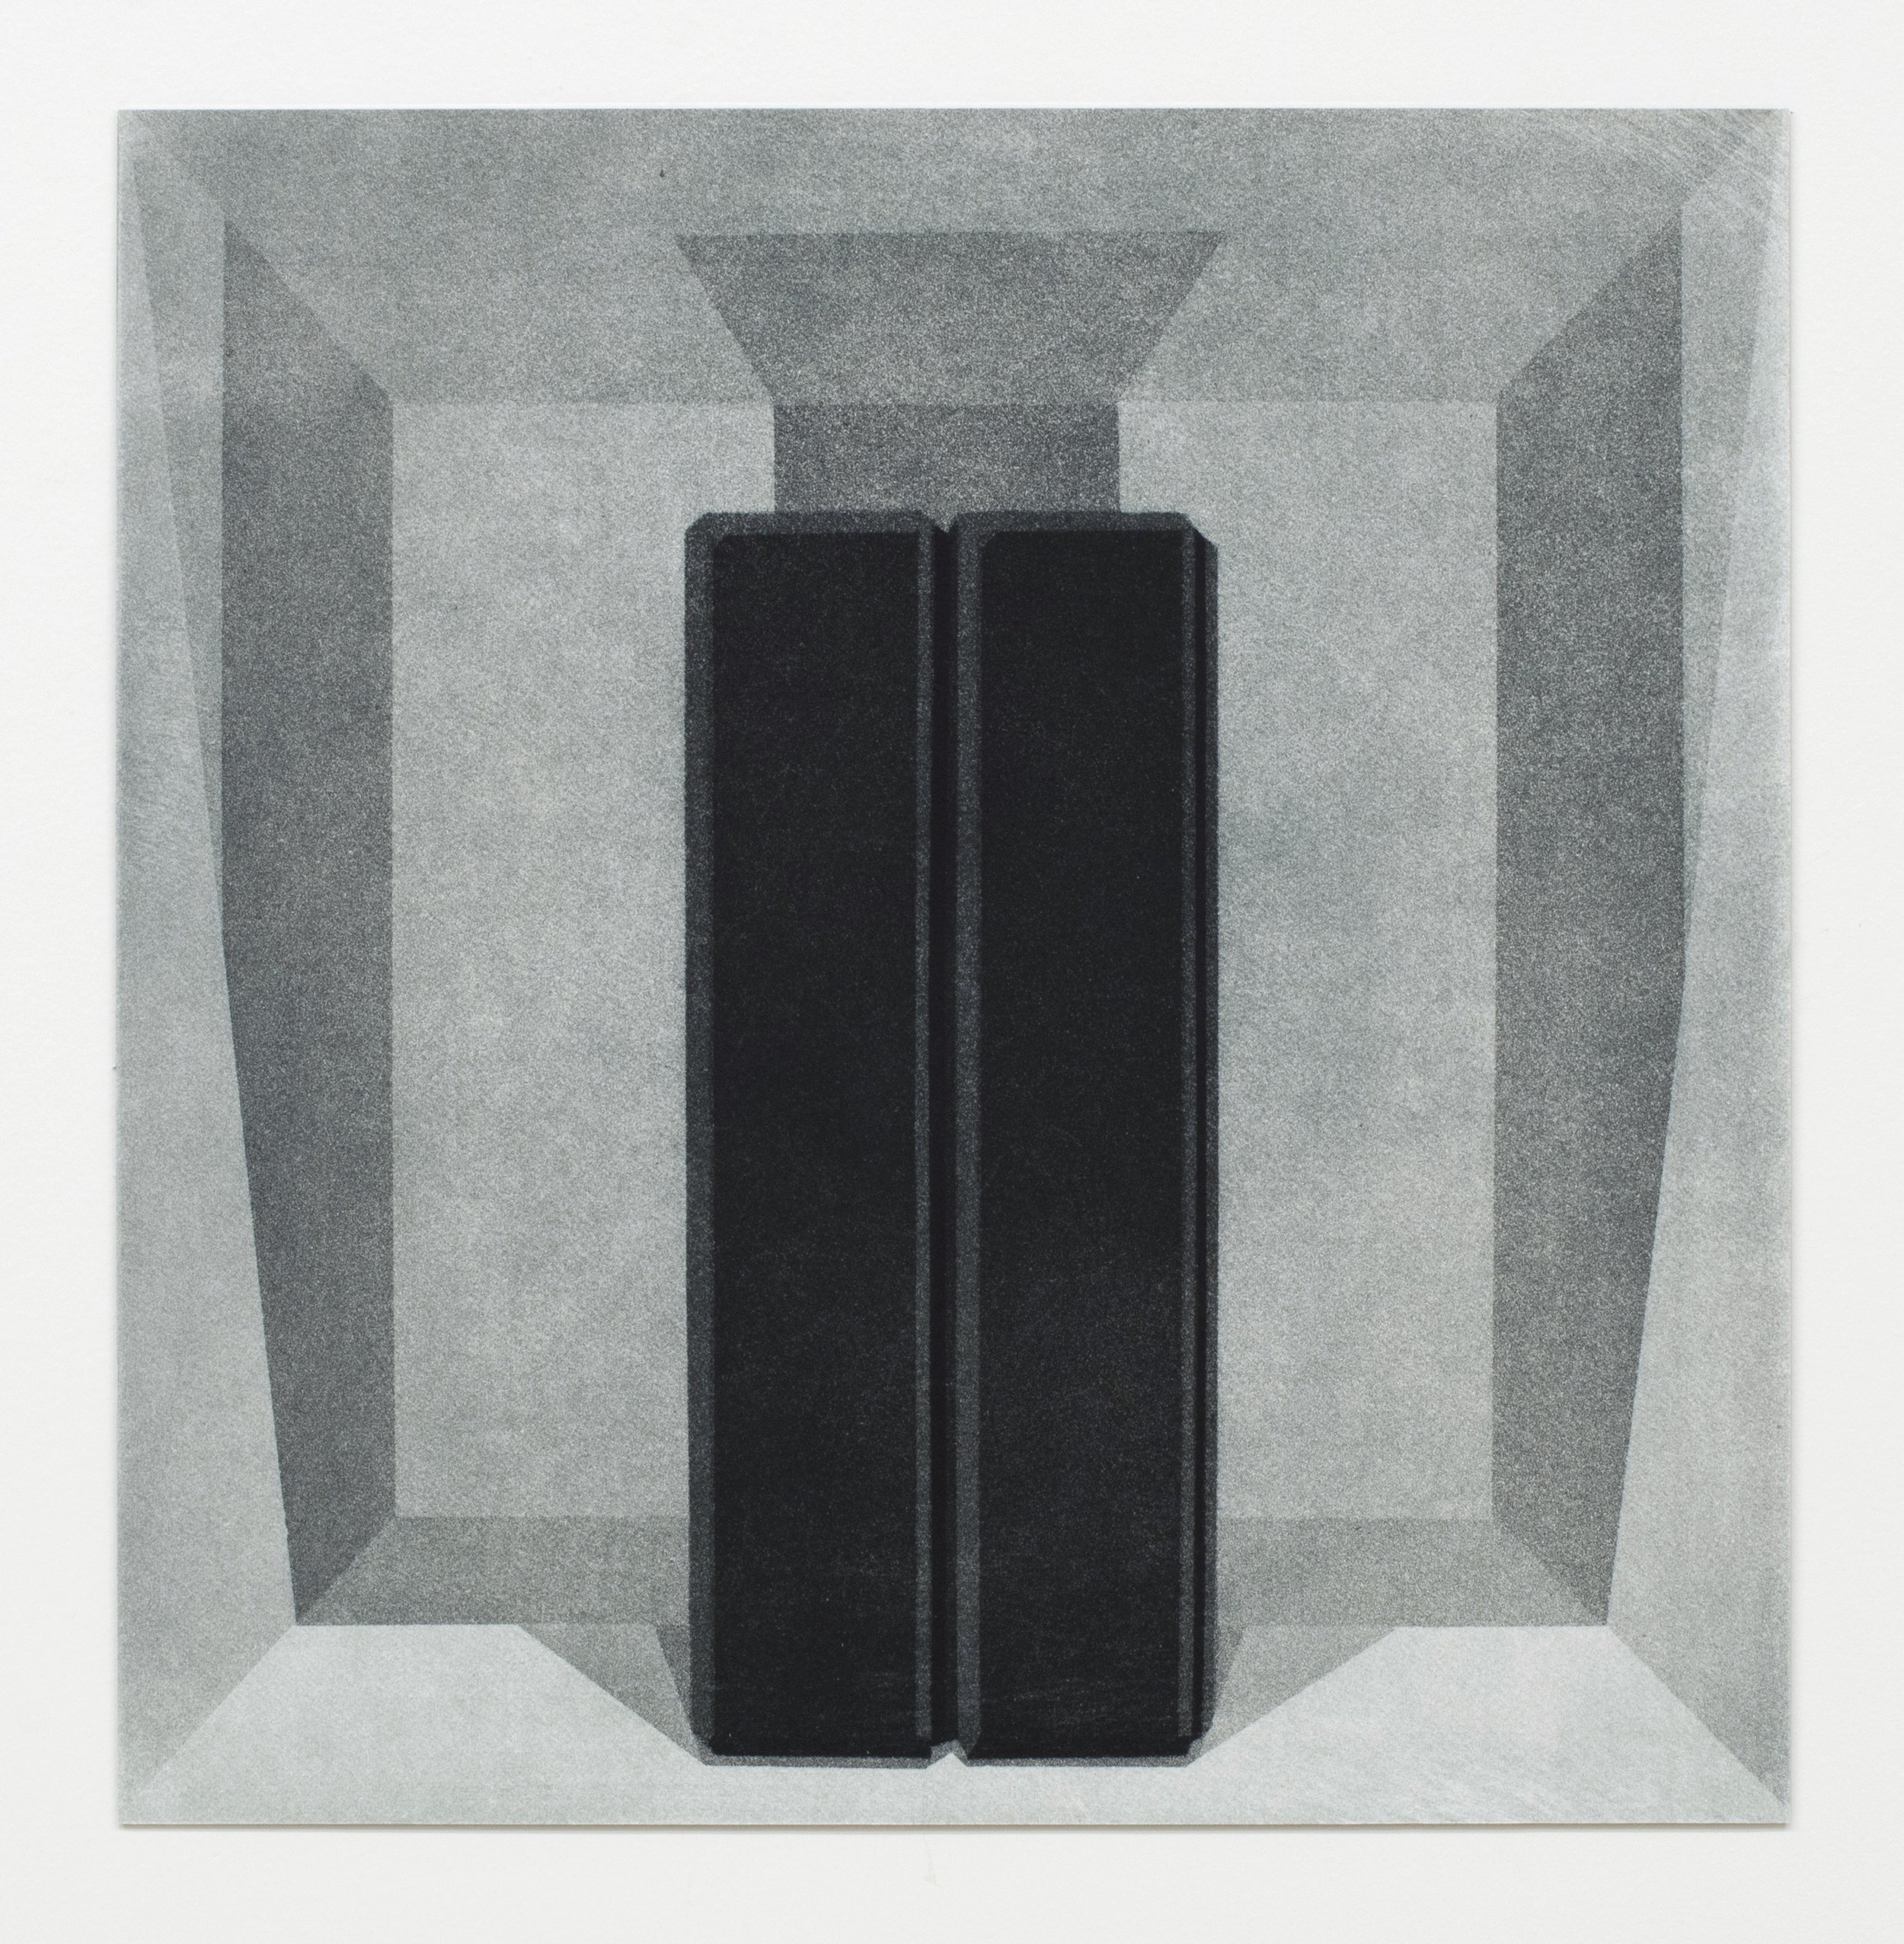   Vexation No. 3, Position No. 1,   13 7/8” H x 13 5/8” w  Aquatint etching on Rives BFK, mounted on steel plates, magnets. (Also available unmounted, paper size “21.75” h x 20.5” w) 2023  